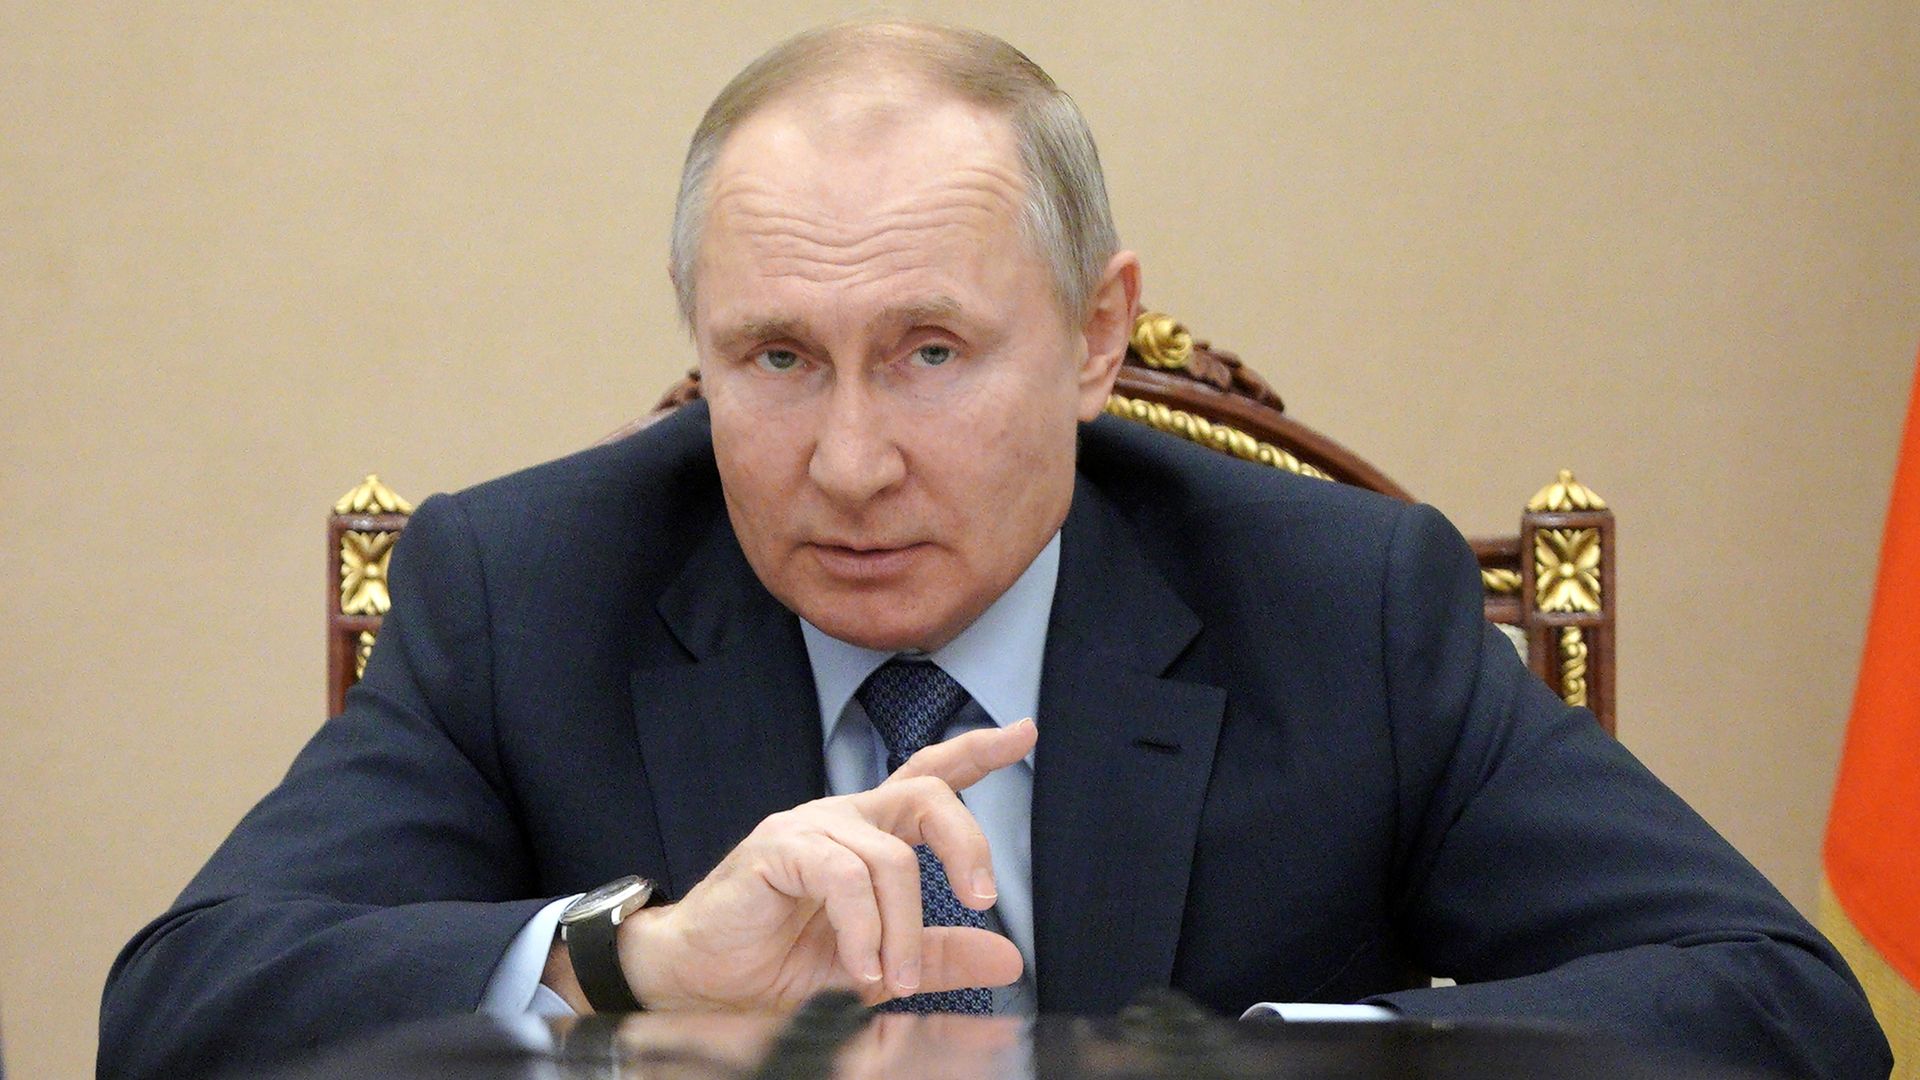 Russia's President Vladimir Putin speaking with members of the Russian government in Moscow on March 10.